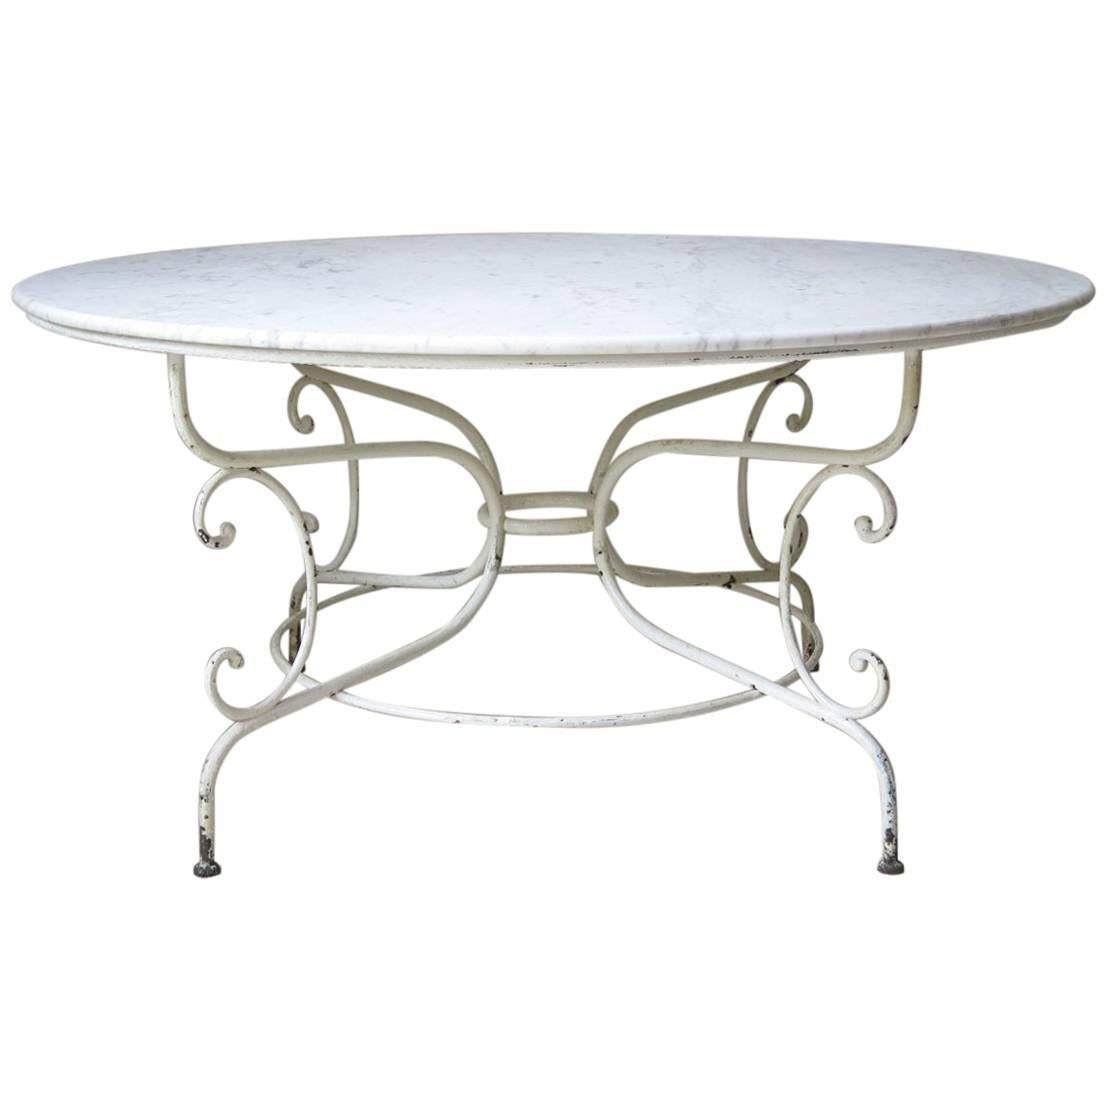 Unusually Large French Iron and Marble Table, circa 1910